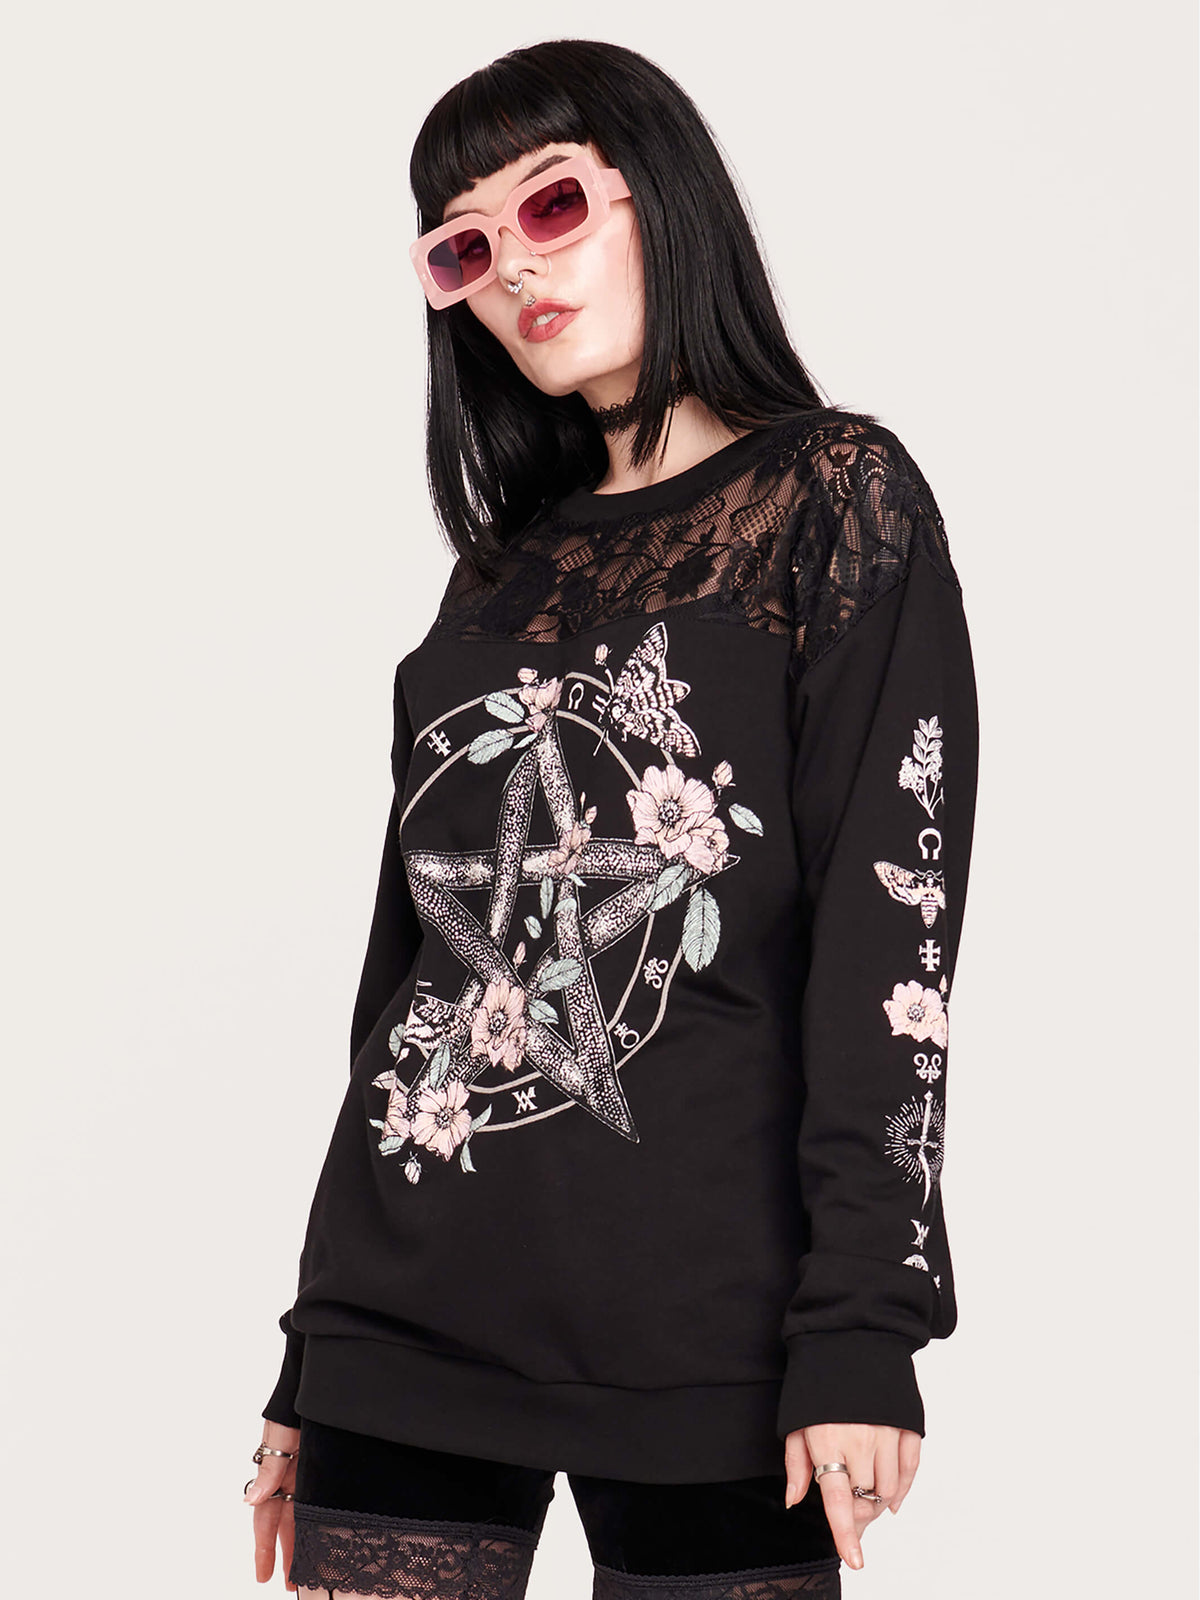  black sweatshirt featuring a deathmoth, pentacle, and magic herbs on the front and arms with black fishnet yoke in front and back. 